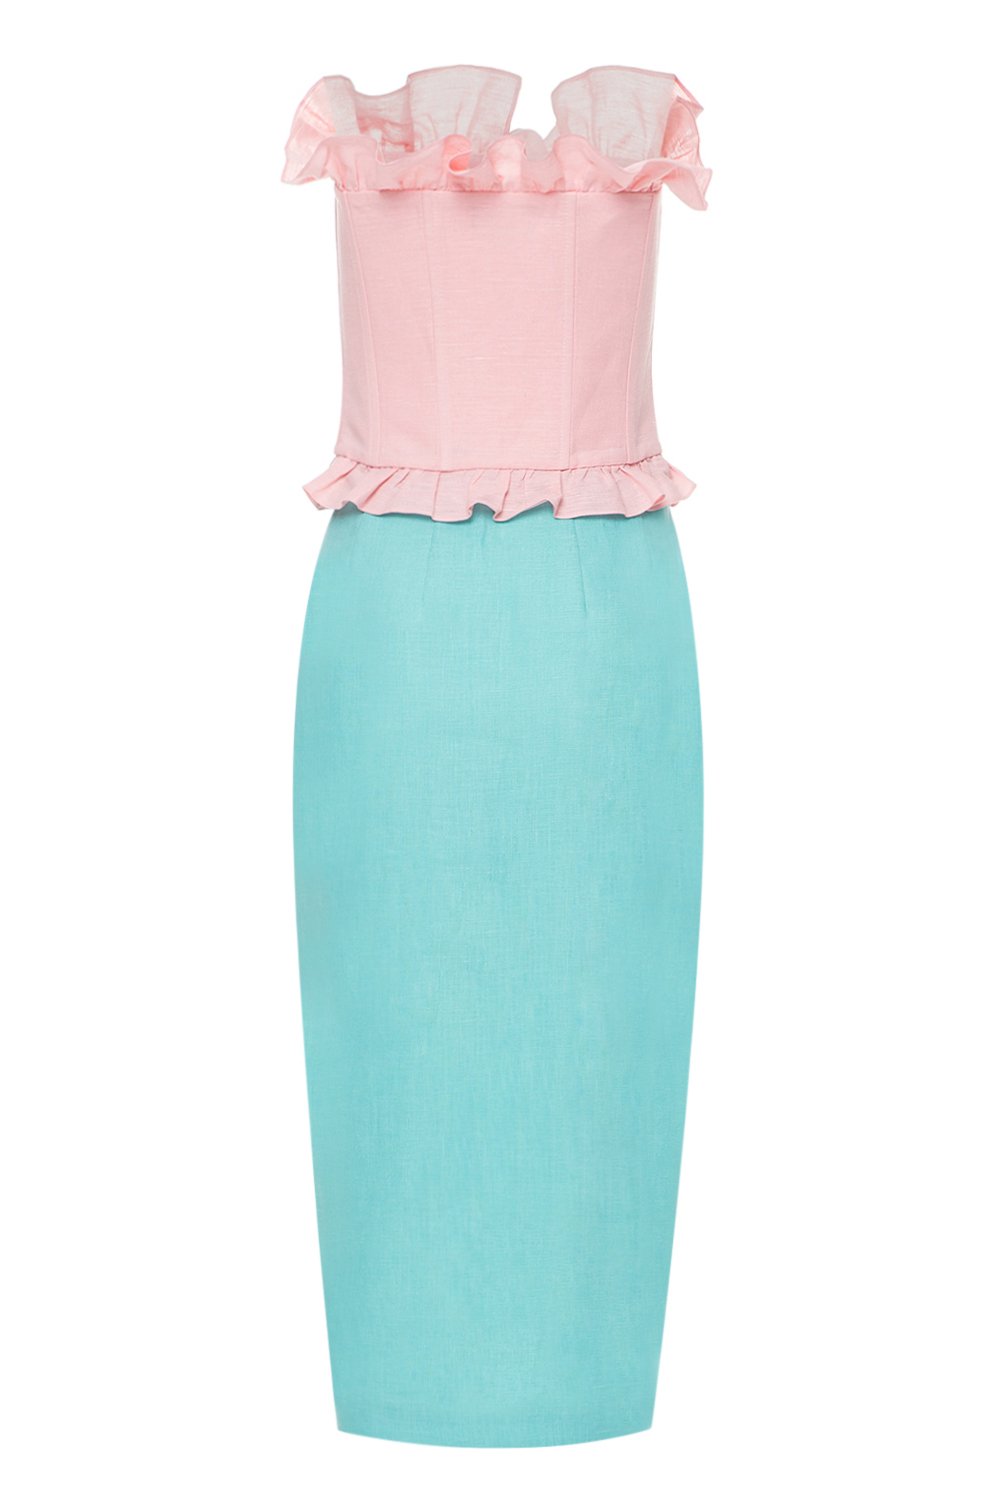 Mint Candy No Sleeves dress